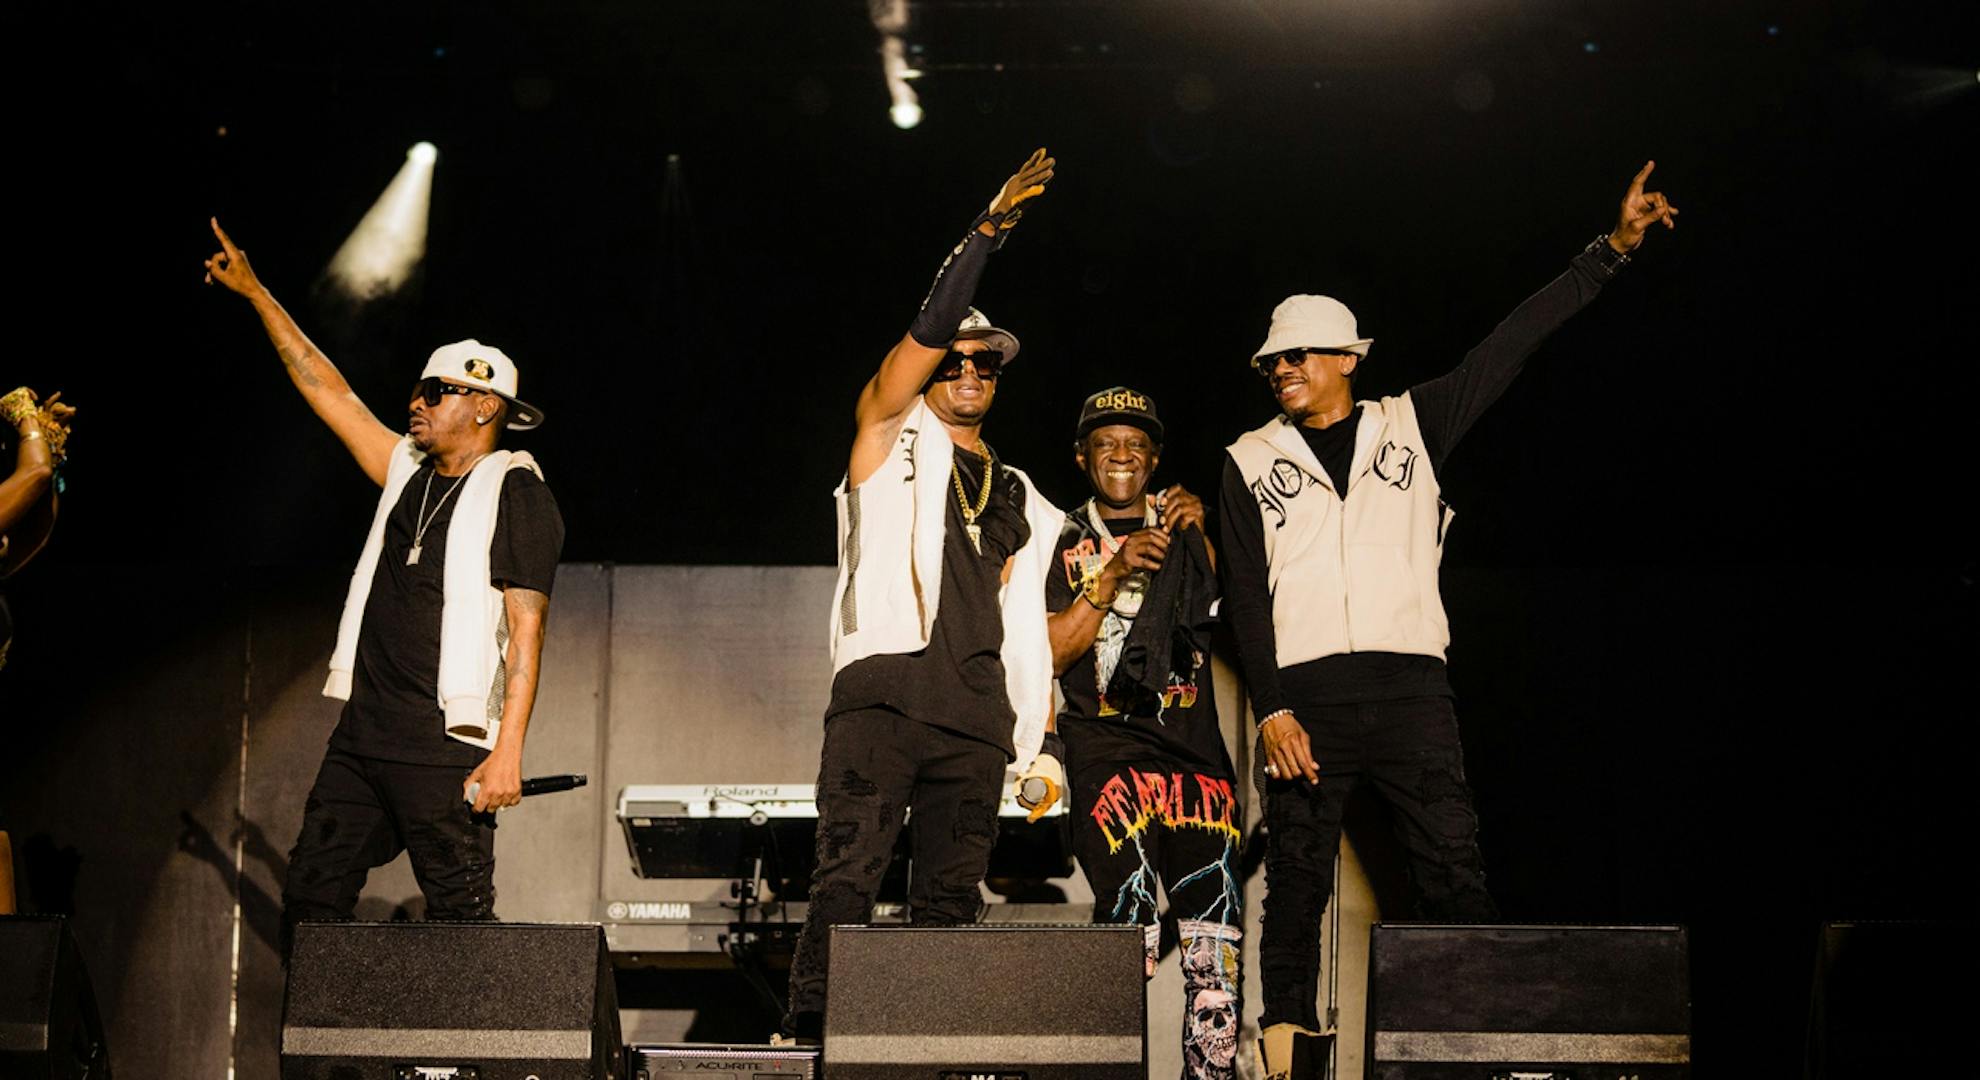 Jodeci and Flavor Flav perform during the 2022 Lovers & Friends music festival at the Las Vegas Festival Grounds on May 15, 2022 in Las Vegas, Nevada.